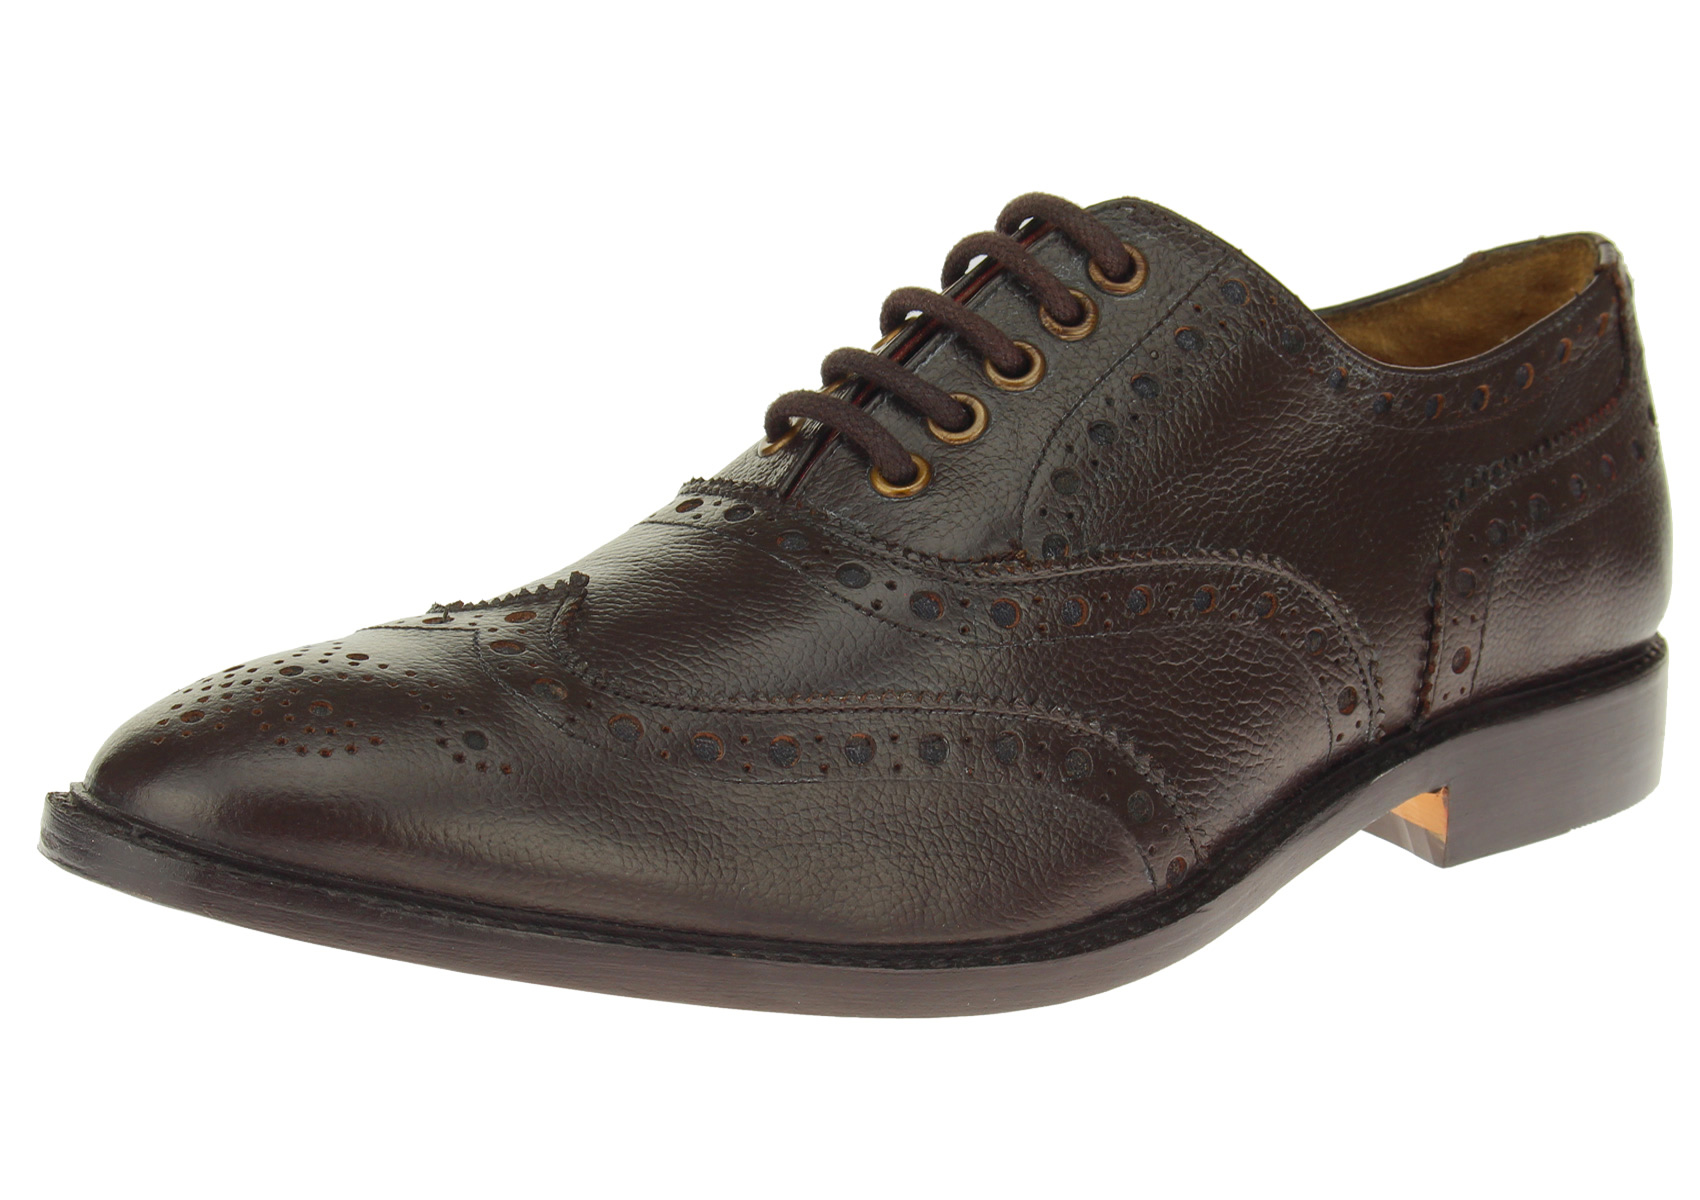 Luciano Natazzi Mens Dress Shoes Full Grain Leather Wingtip Oxford Lace ...